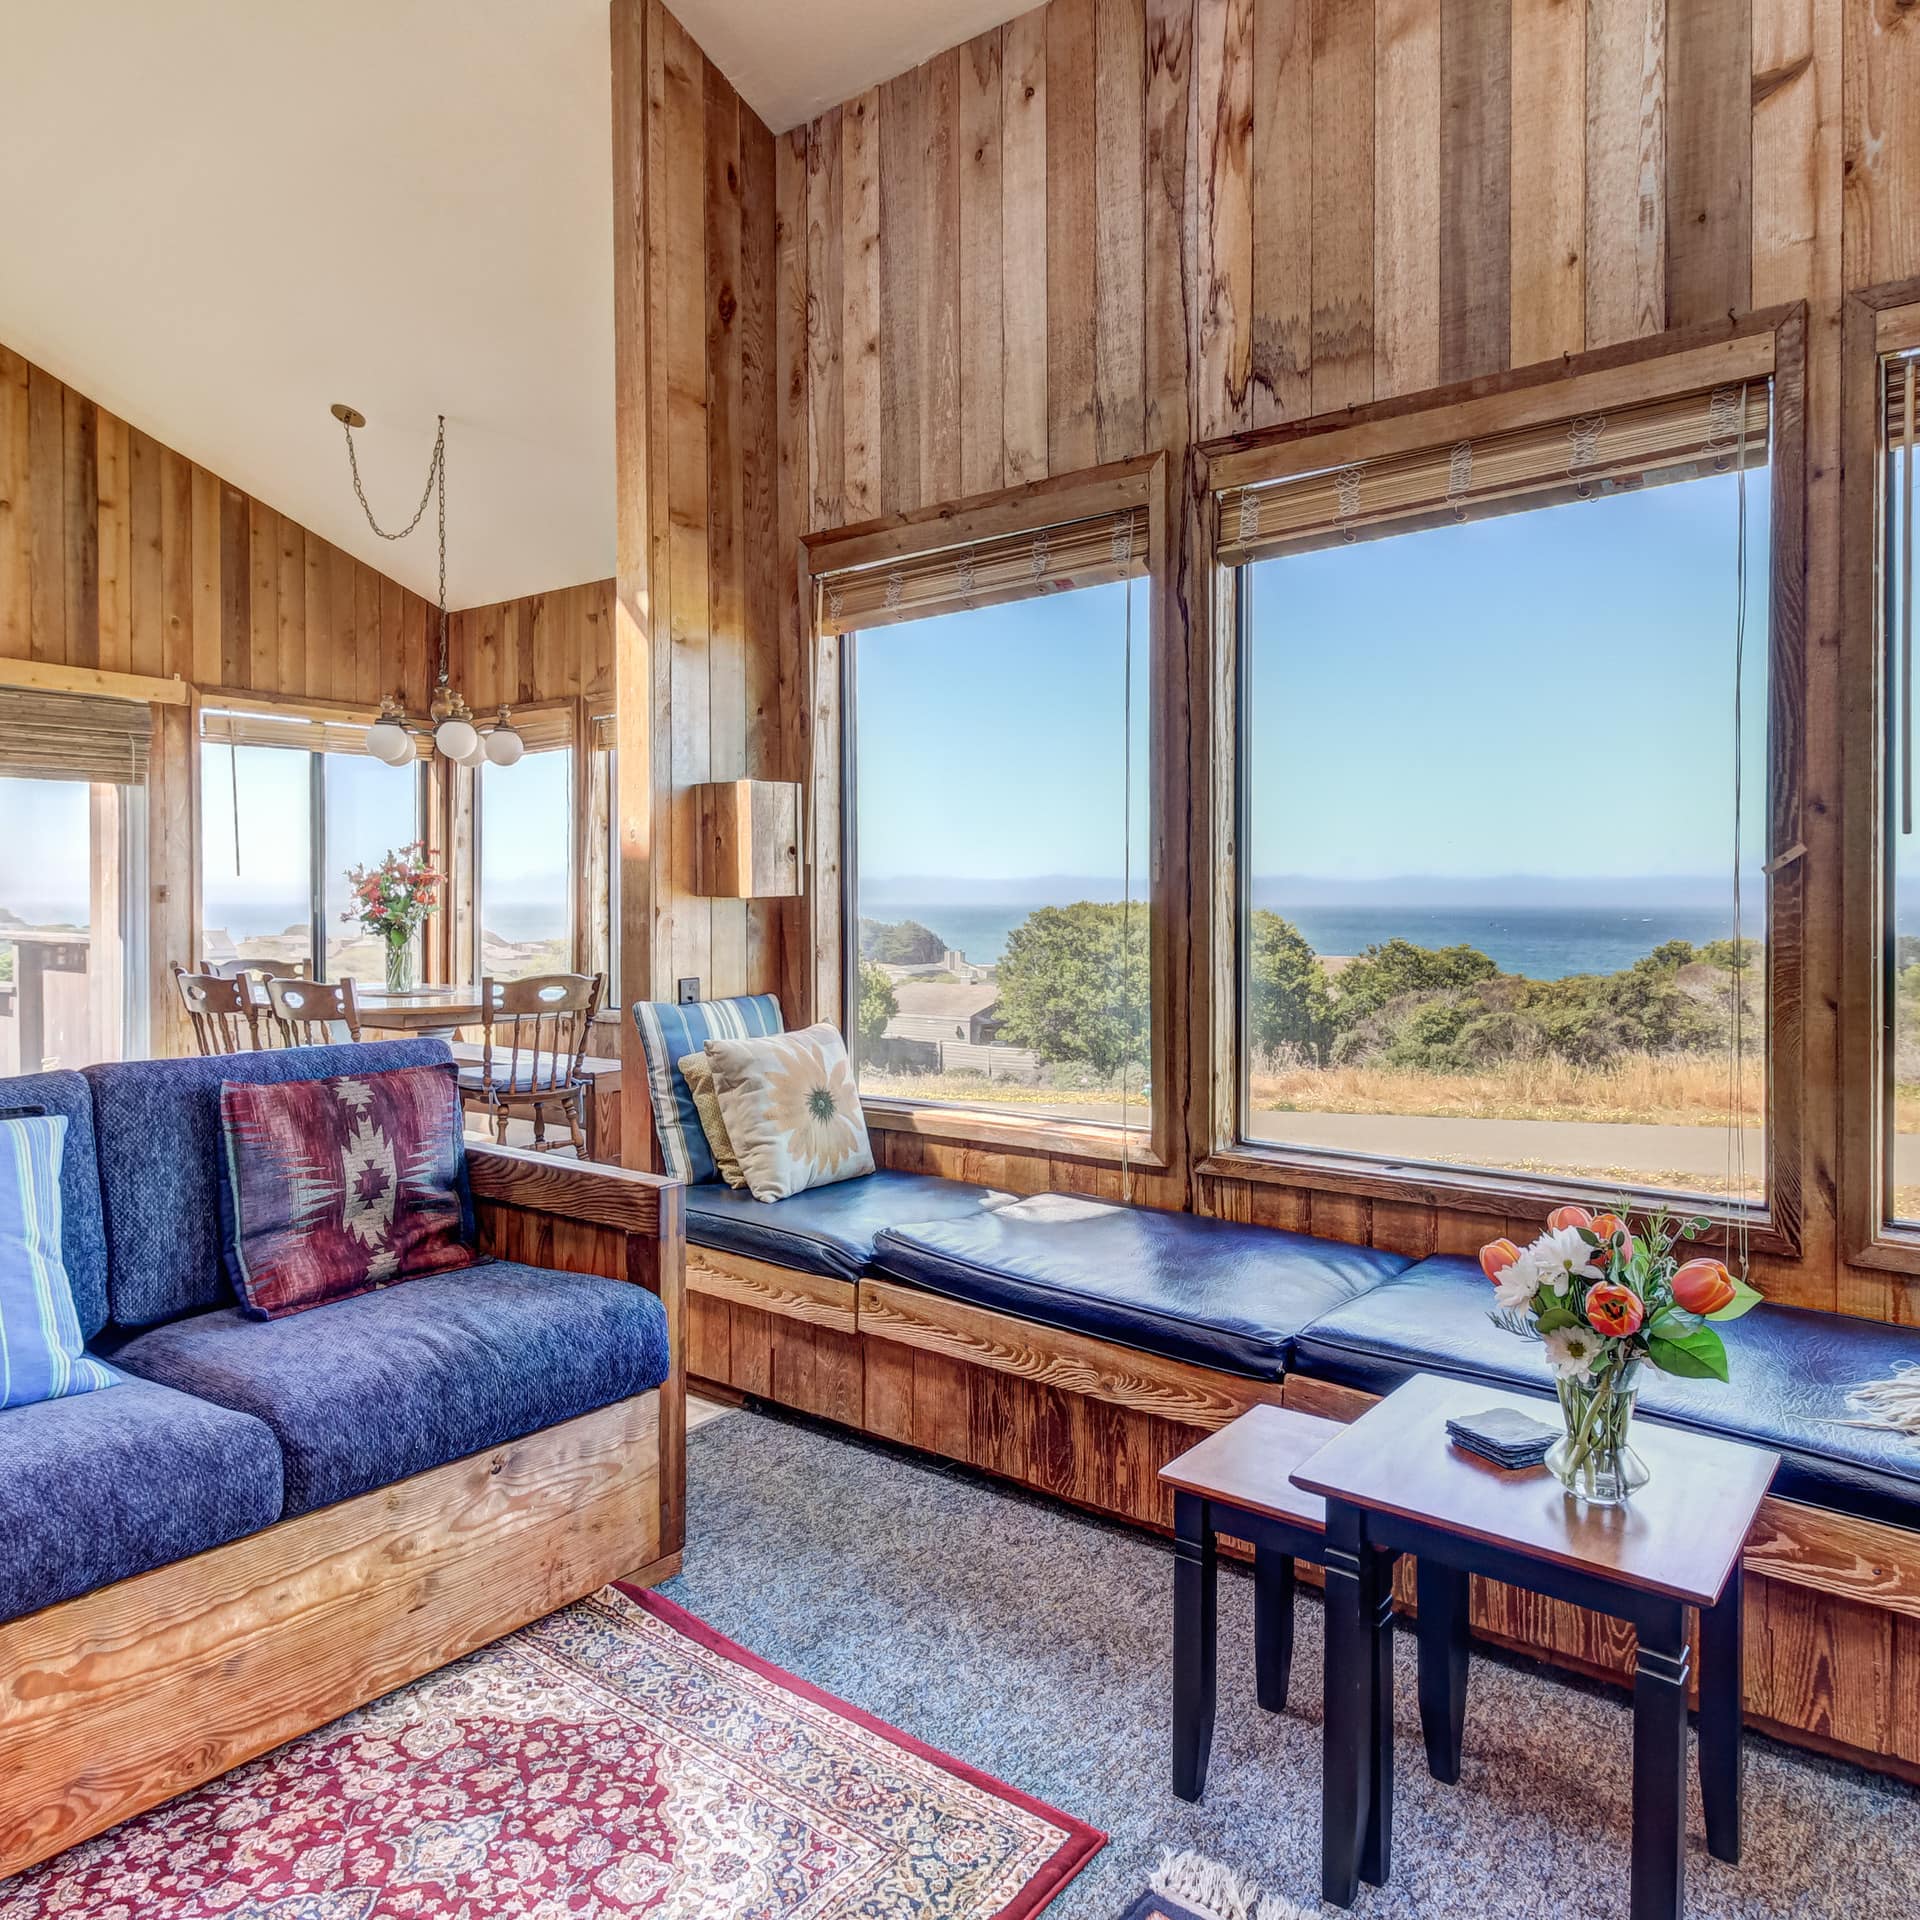 A dog-friendly vacation rental home with ocean views in Sea Ranch, California